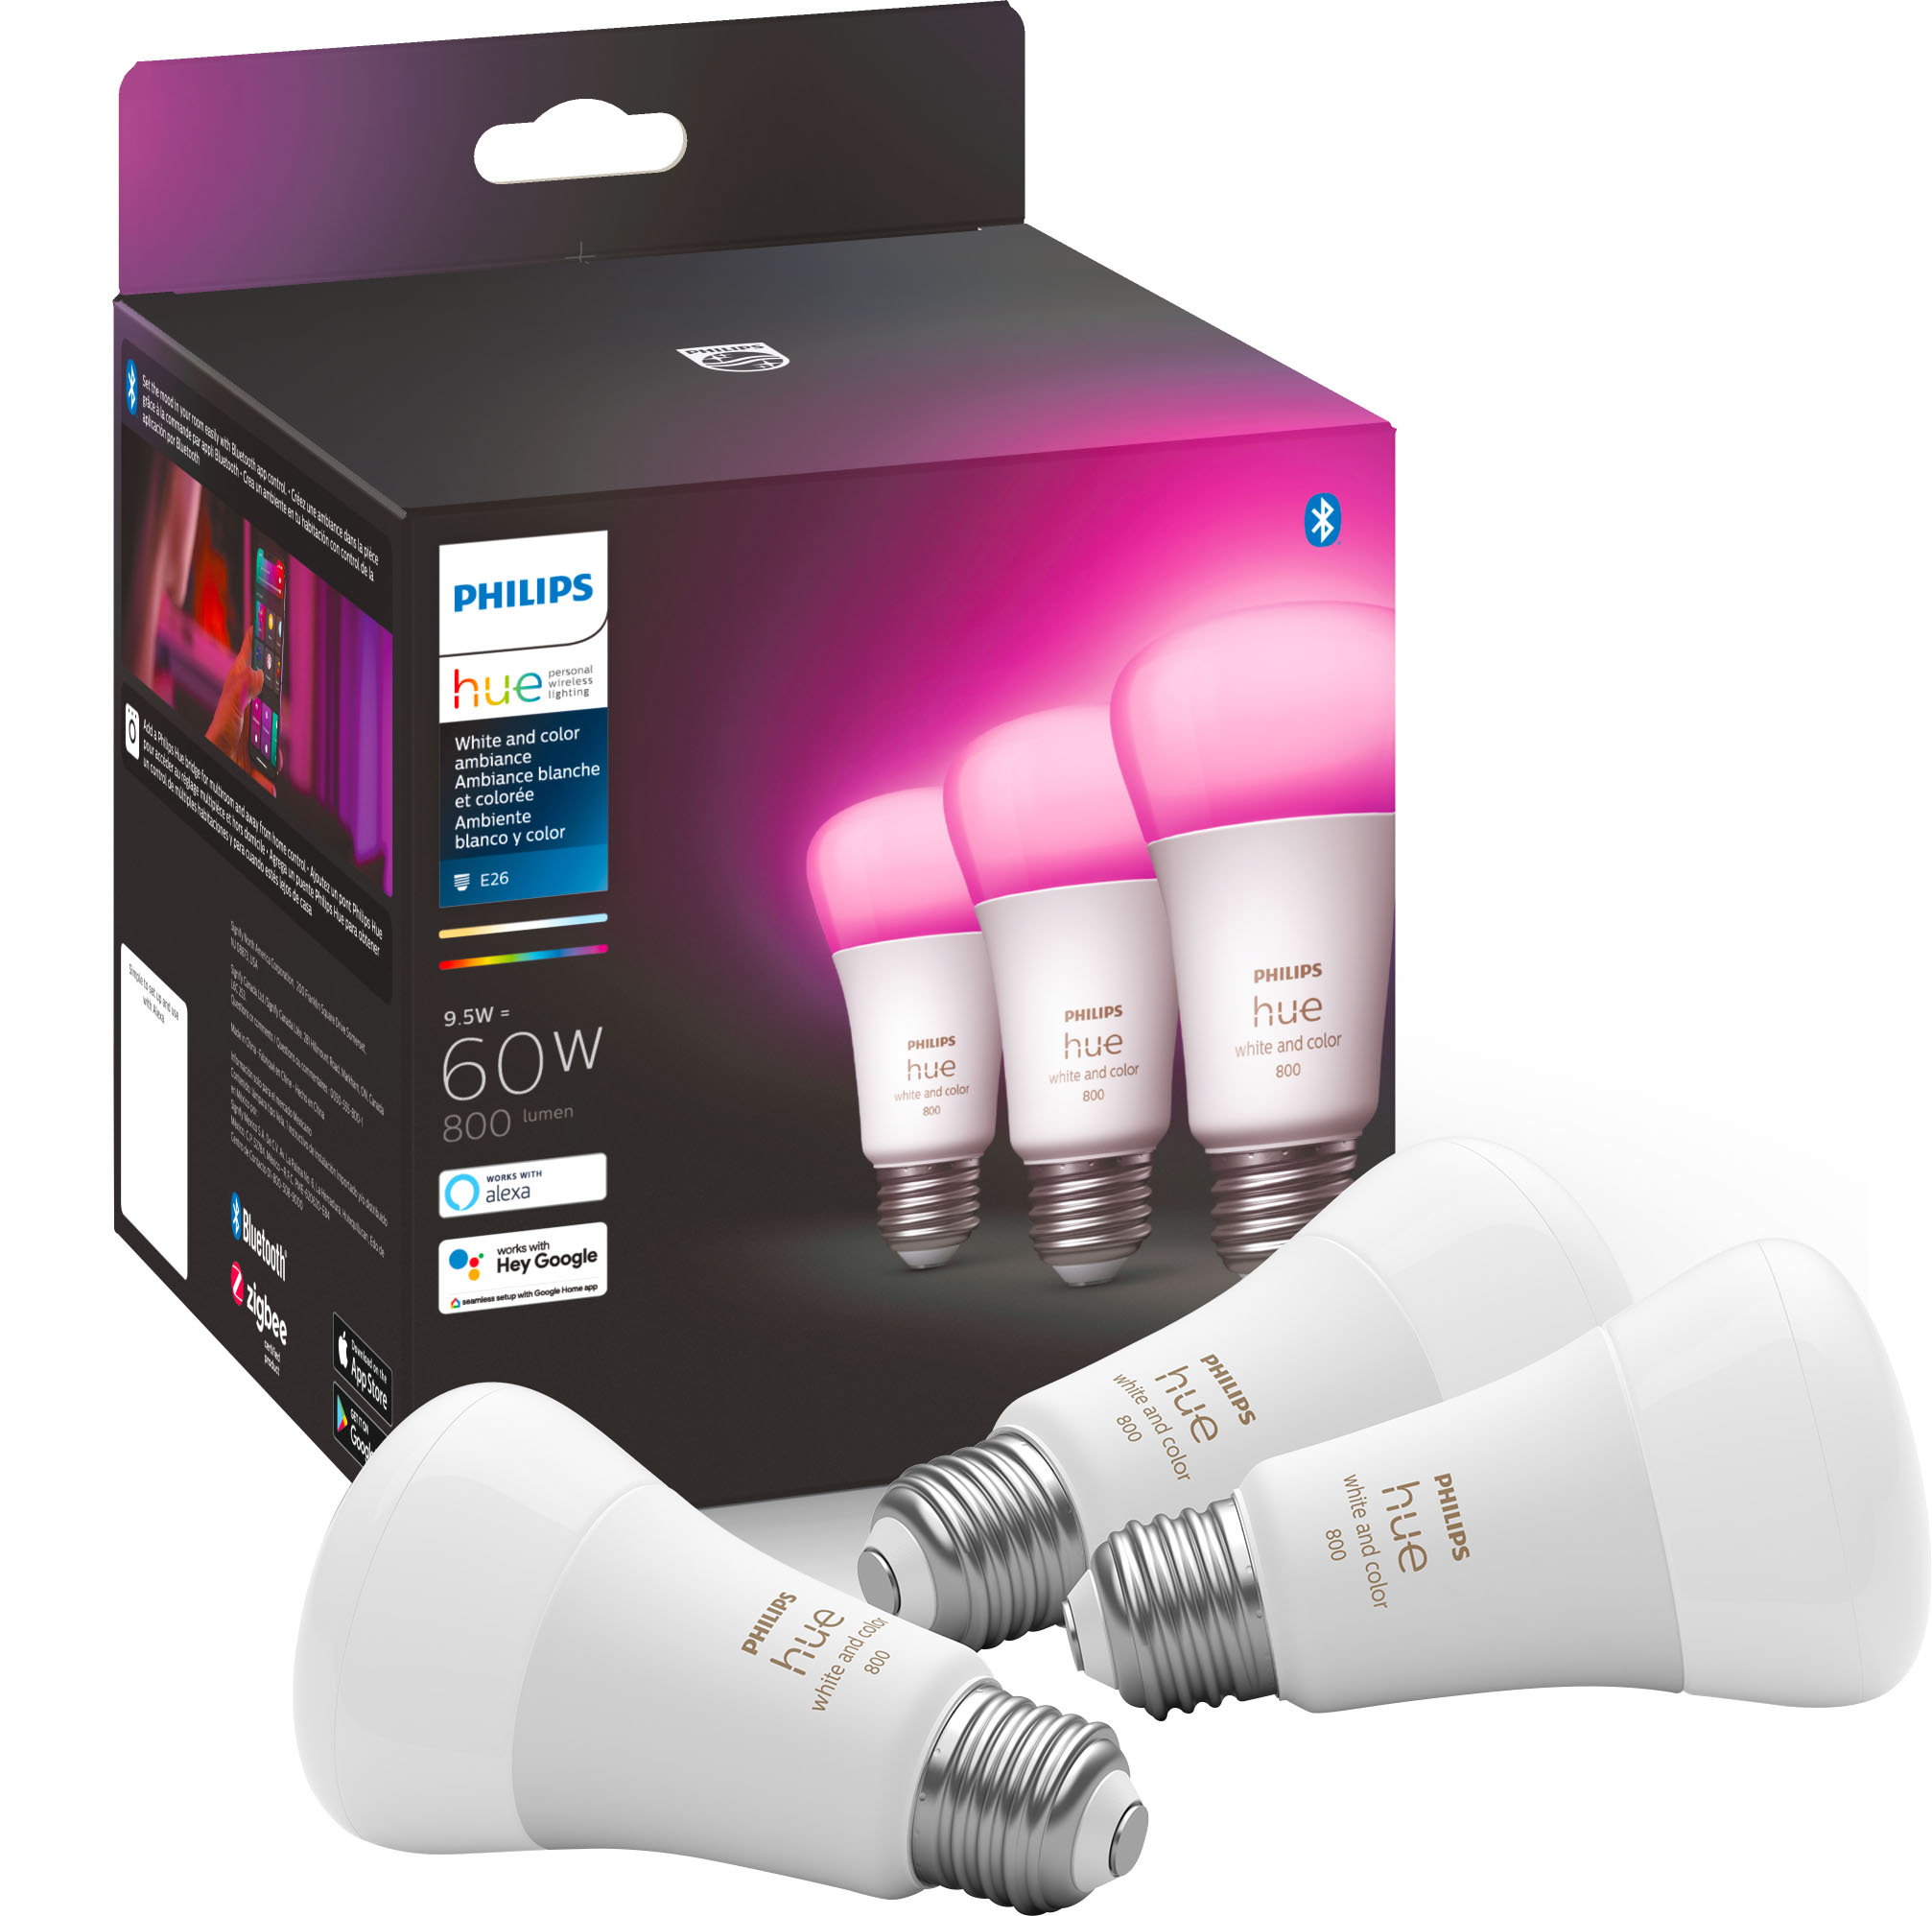 Philips Hue White and Color LED Smart Button Starter Kit with Philips Hue White and Color Ambiance A19 LED Smart Bulb